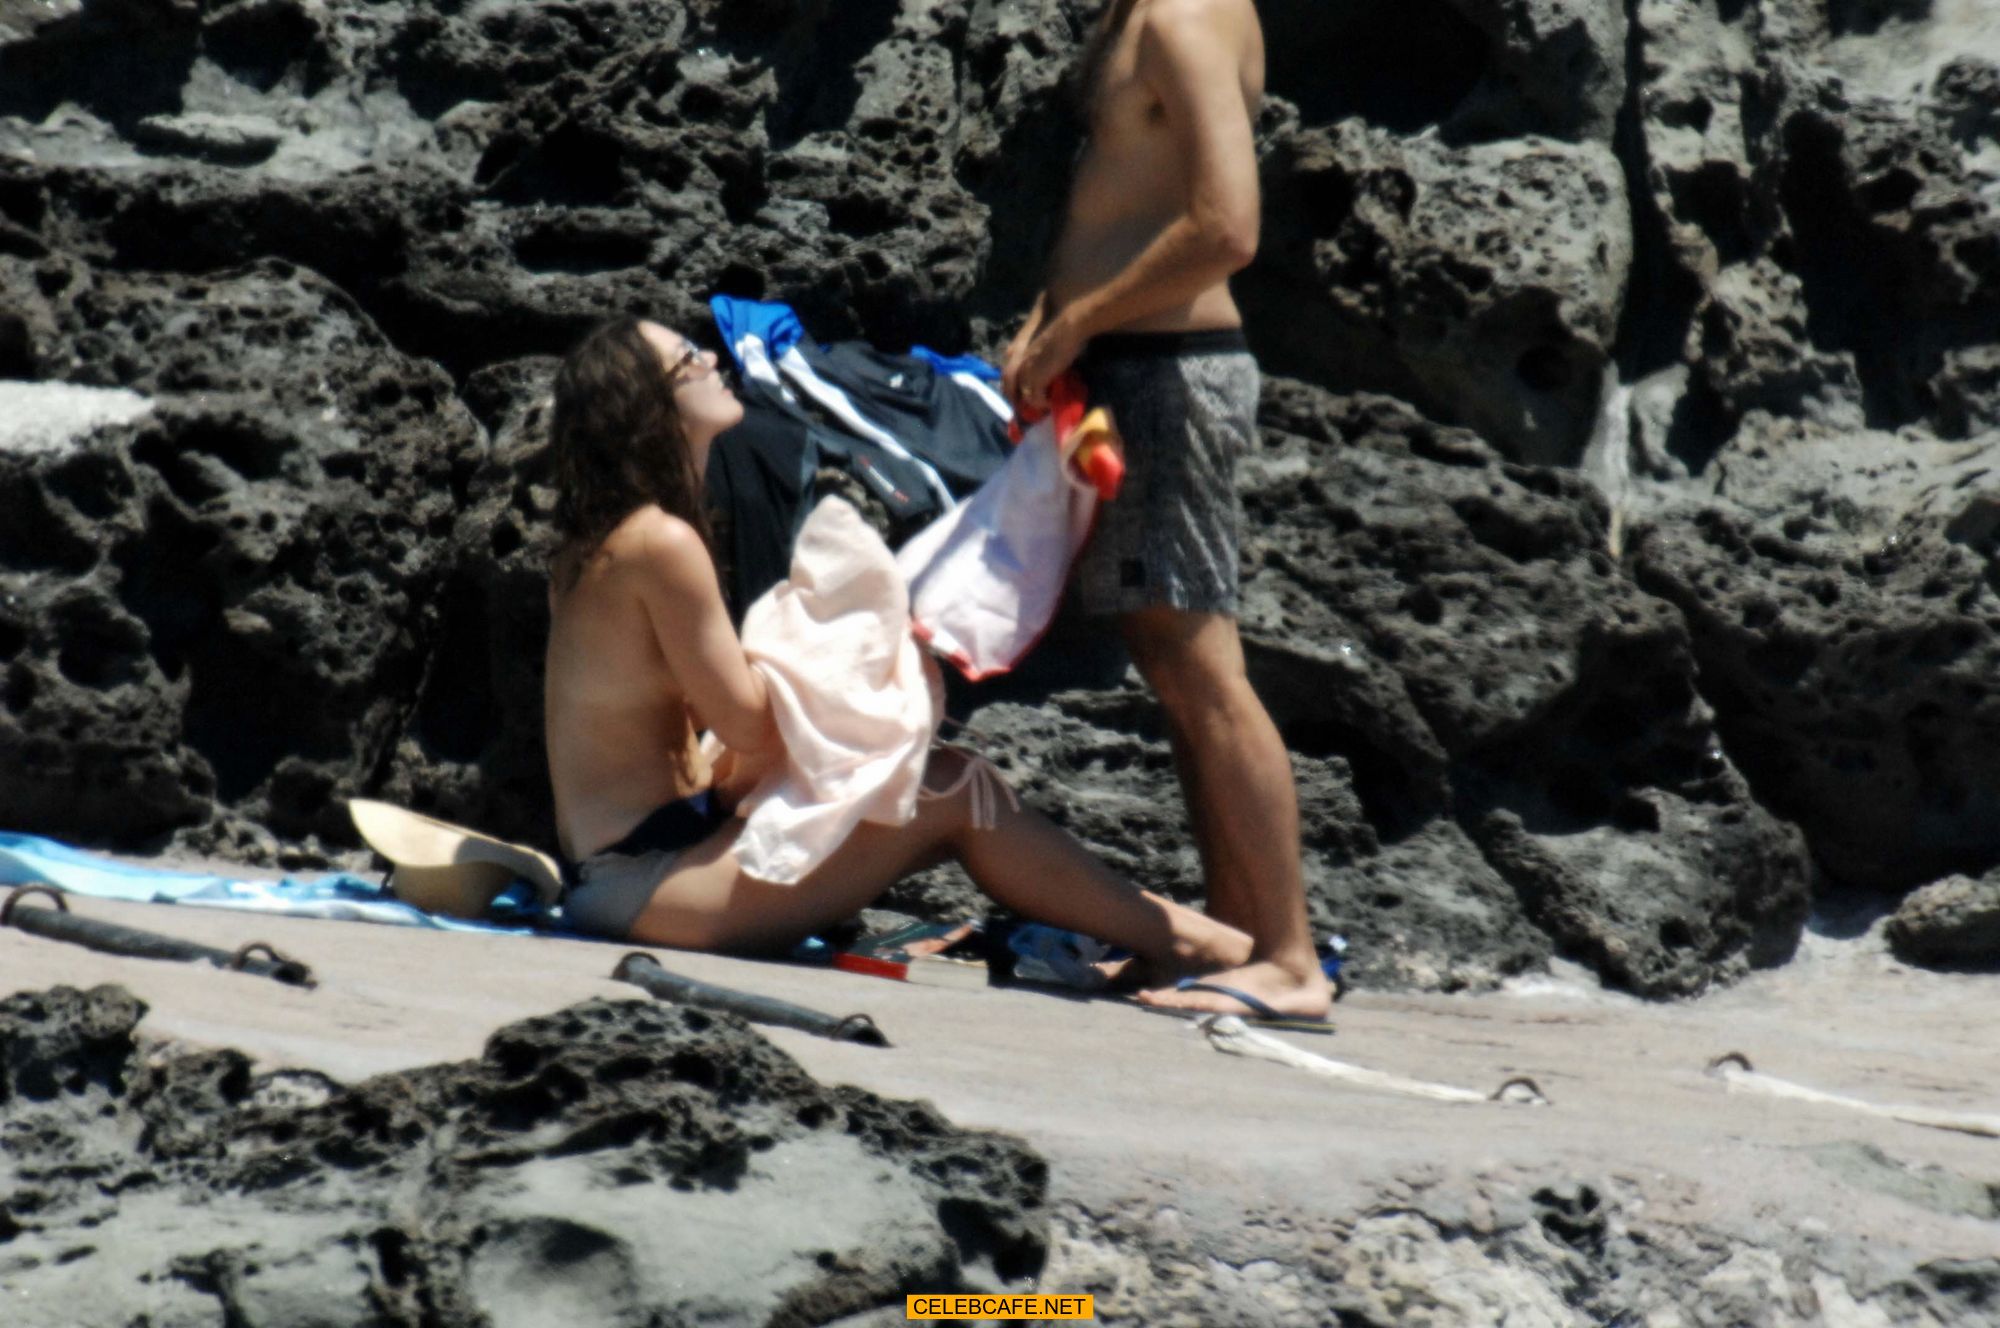 keira_knightley_on_the_beach_in_pantelleria_some_topless_62918_19.jpg